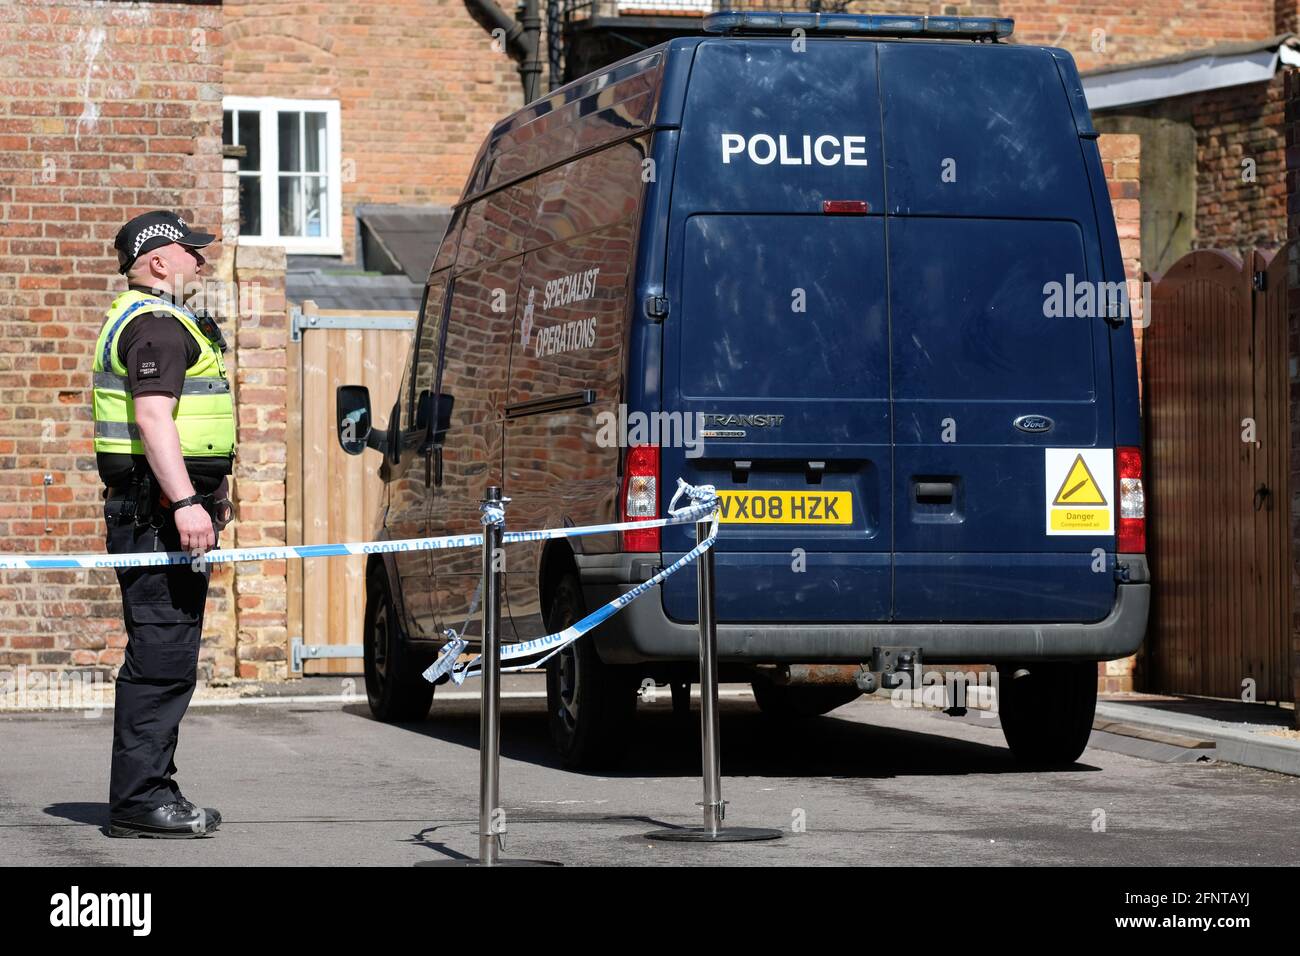 Gloucester, Gloucestershire, UK - Wednesday 19th May 2021 - Police officer at the rear of the Clean Plate cafe as Police begin excavations in the search for Mary Bastholm who went missing in 1968 aged just 15 years old and who may have been a victim of serial killer Fred West. Photo Steven May / Alamy Live News Stock Photo